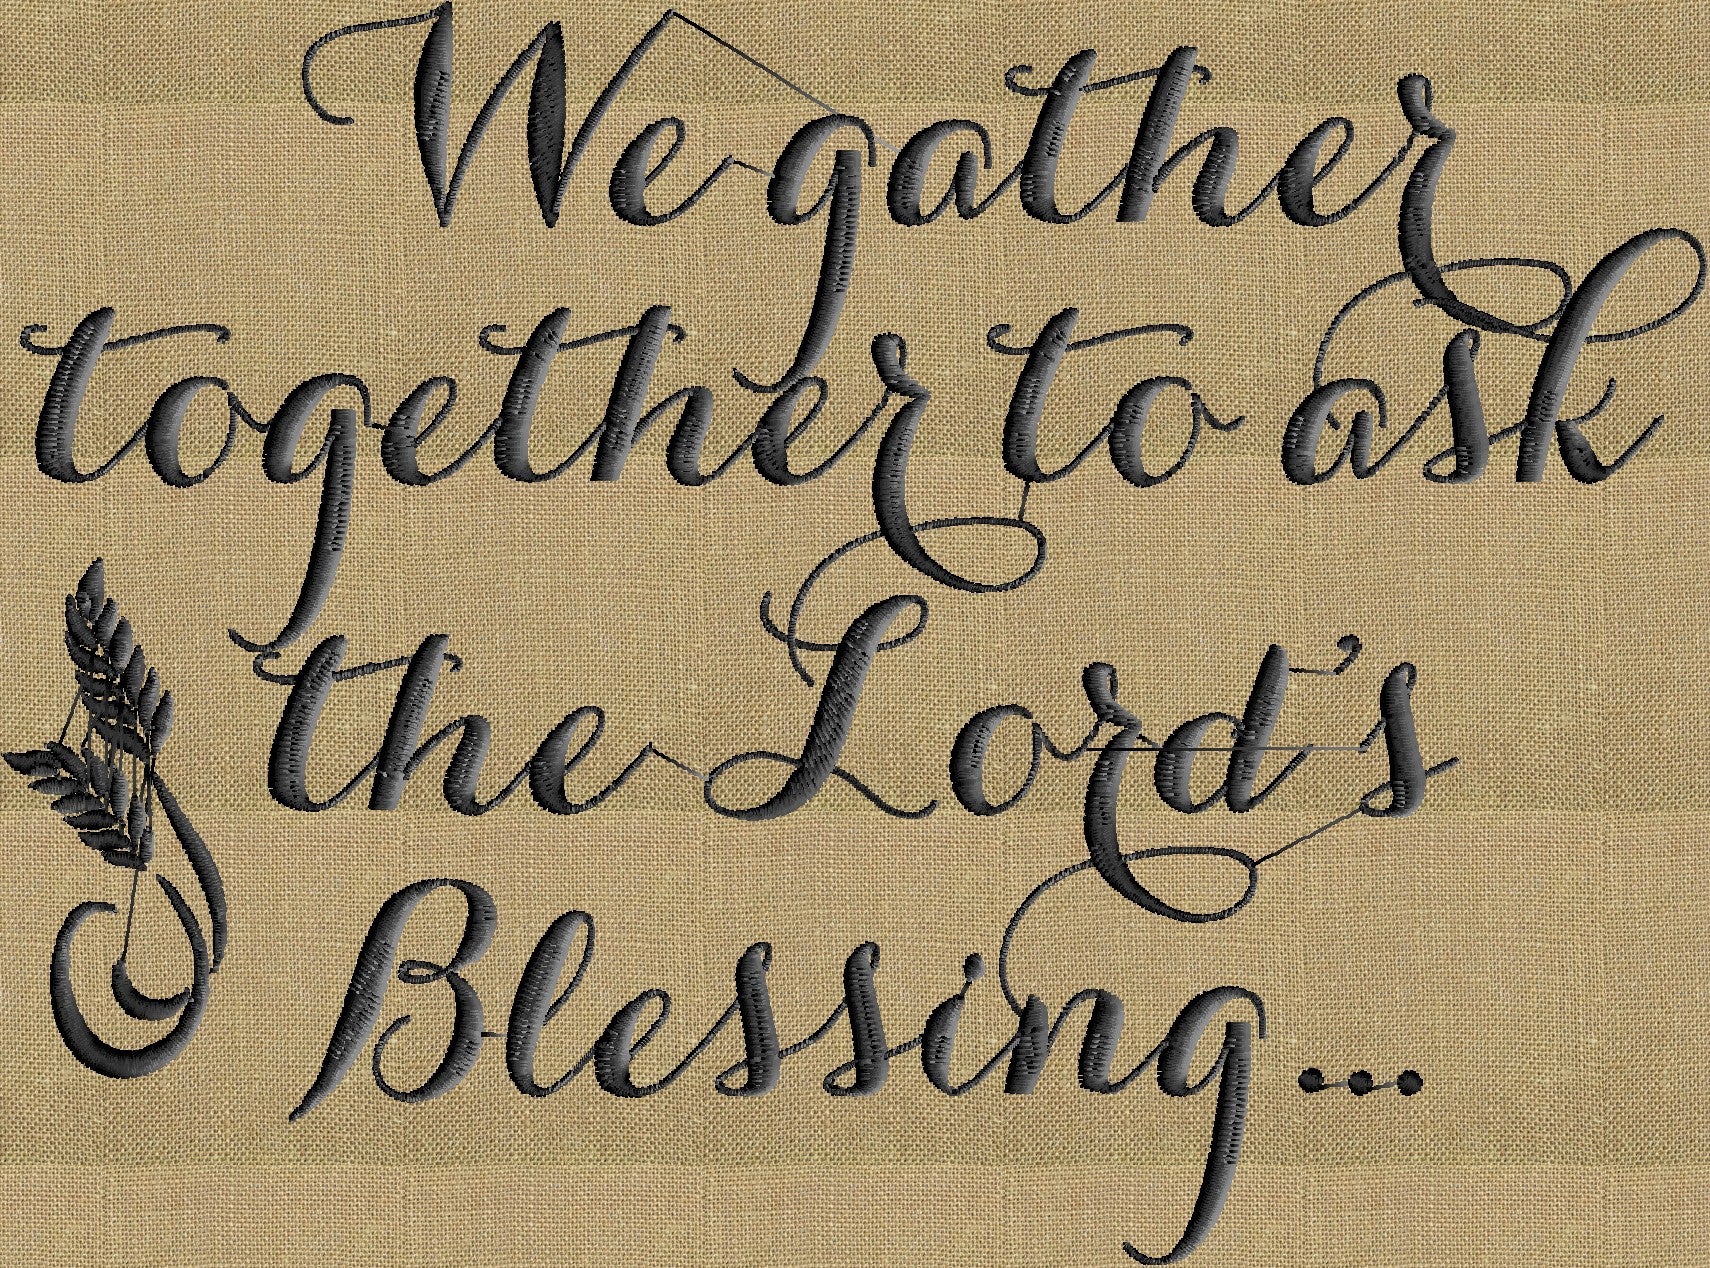 Thanksgiving quote "We Gather together" - EMBROIDERY DESIGN FILE